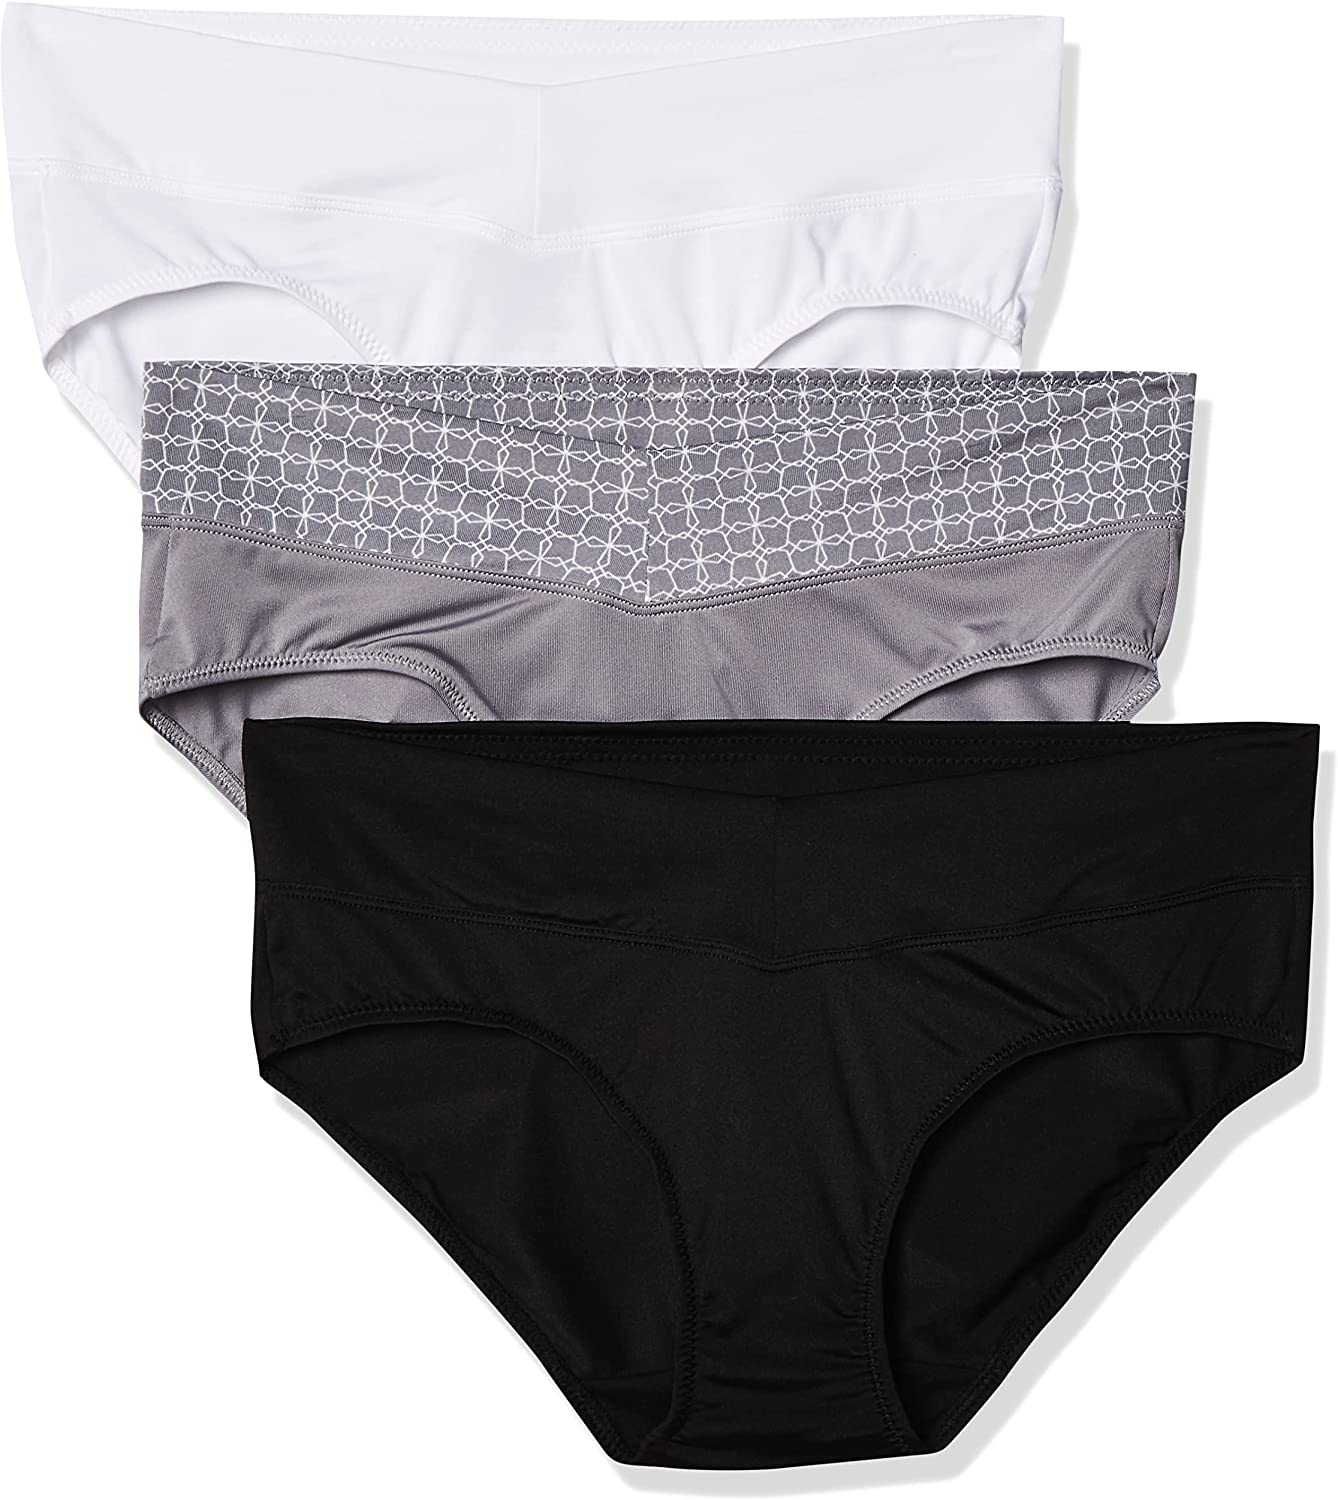 Warner's womens Blissful Benefits No Muffin Top 3 Pack Hipster